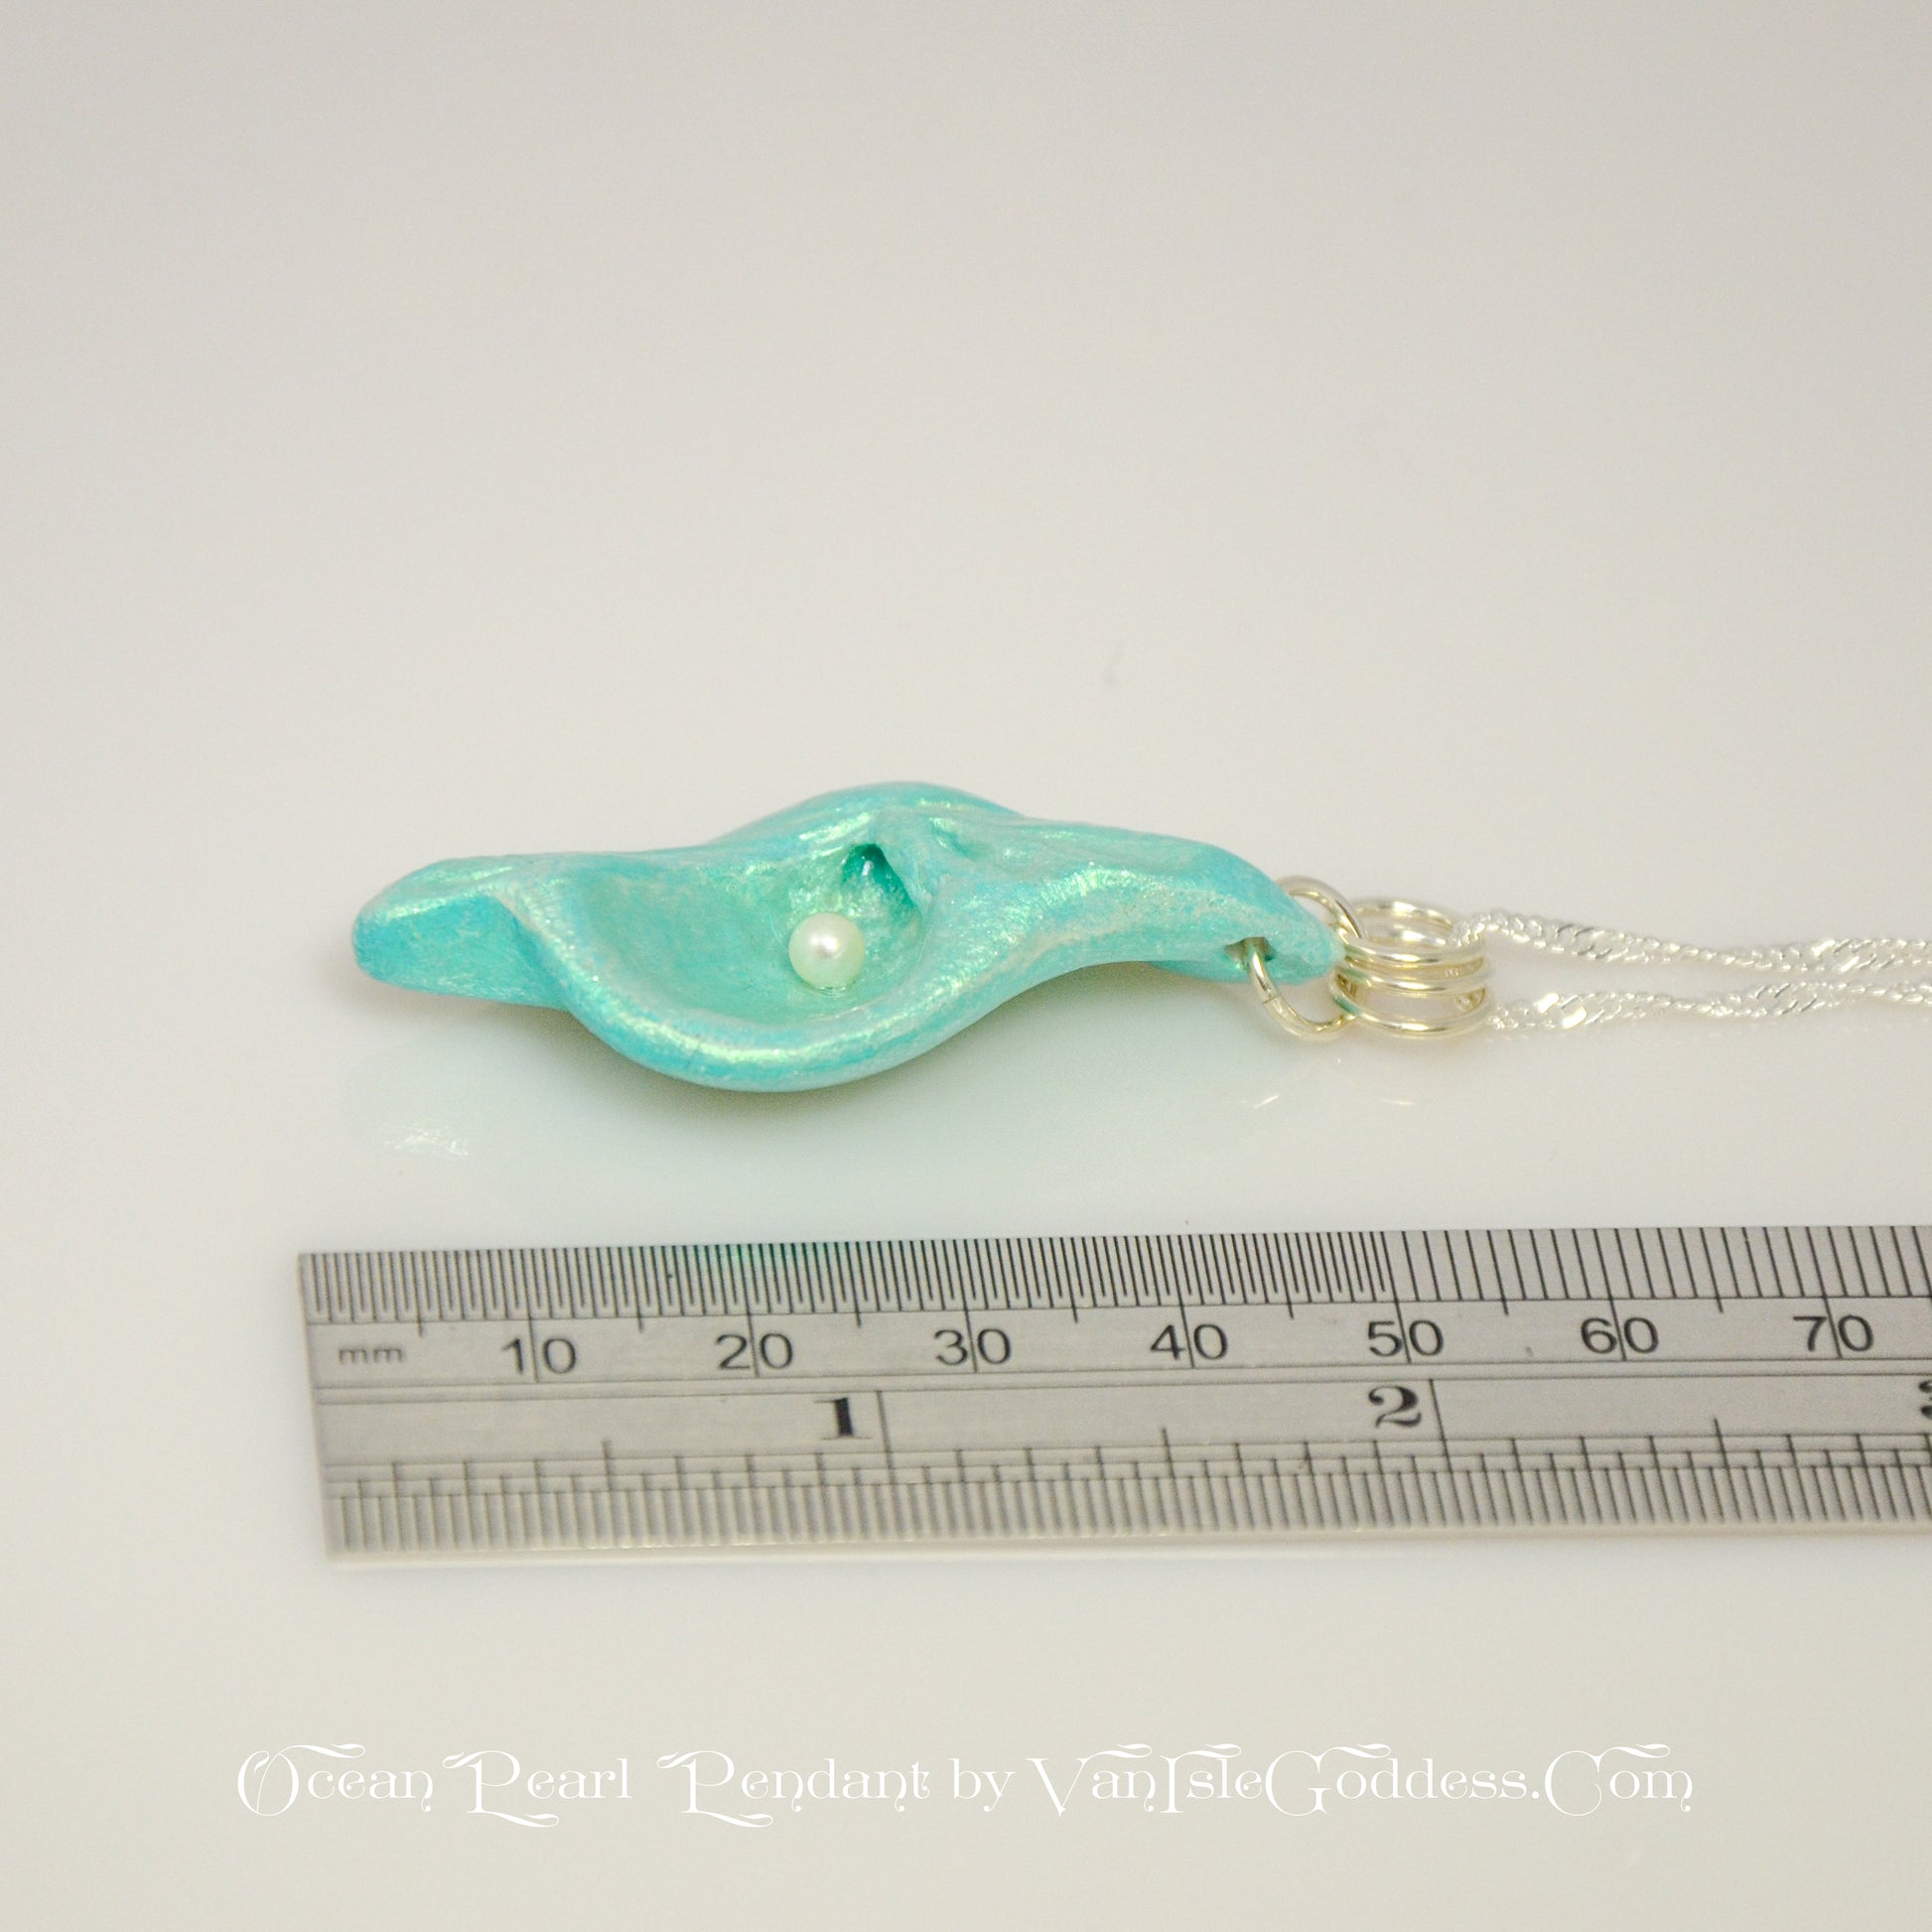 Ocean Pearl natural seashell pendant has a  real freshwater baby pearl. The pendant is shown along side a ruler so the viewer can see how long the pendant is.